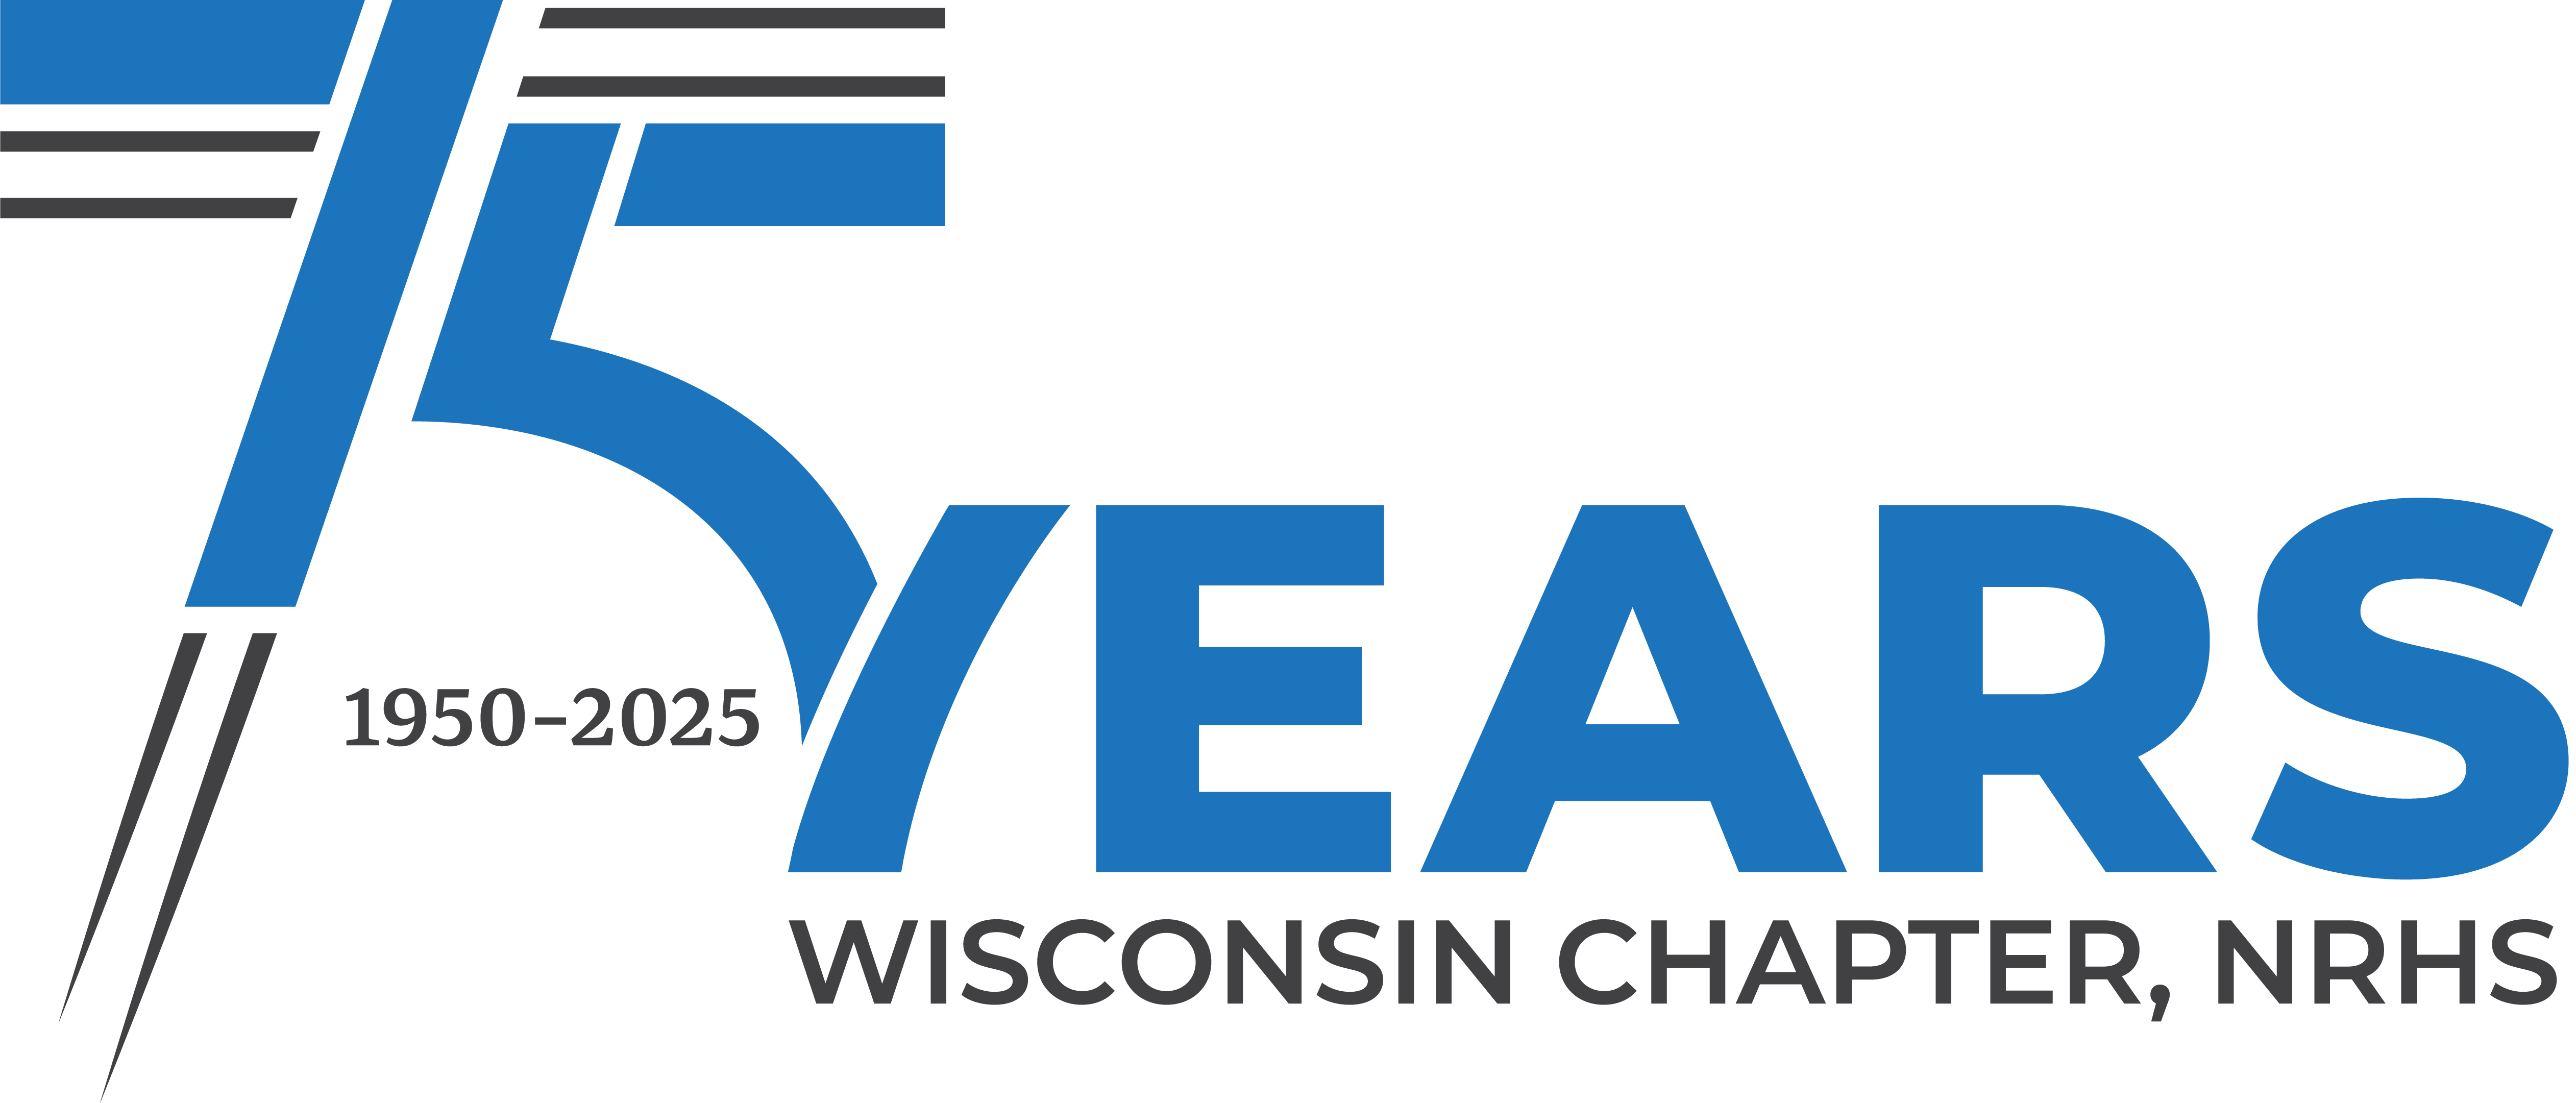 NRHS Wisconsin Chapter 75 Years Logo